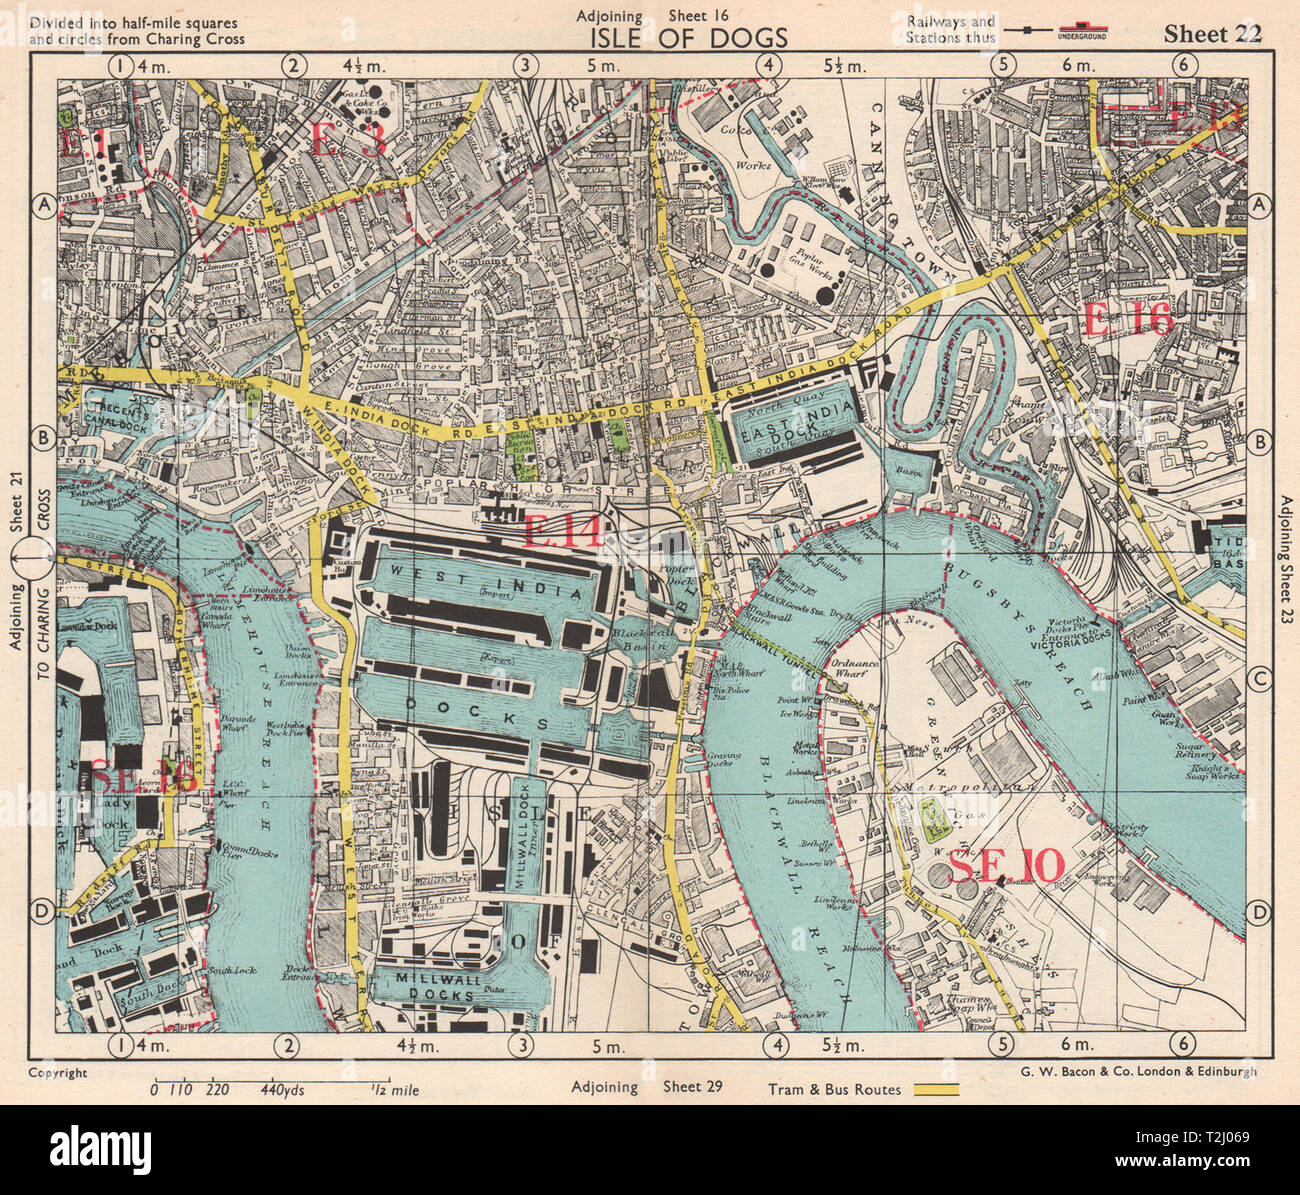 E LONDON Surrey Docks Isle of Dogs Canning Town Pappel Limehouse. Speck 1948 Karte Stockfoto